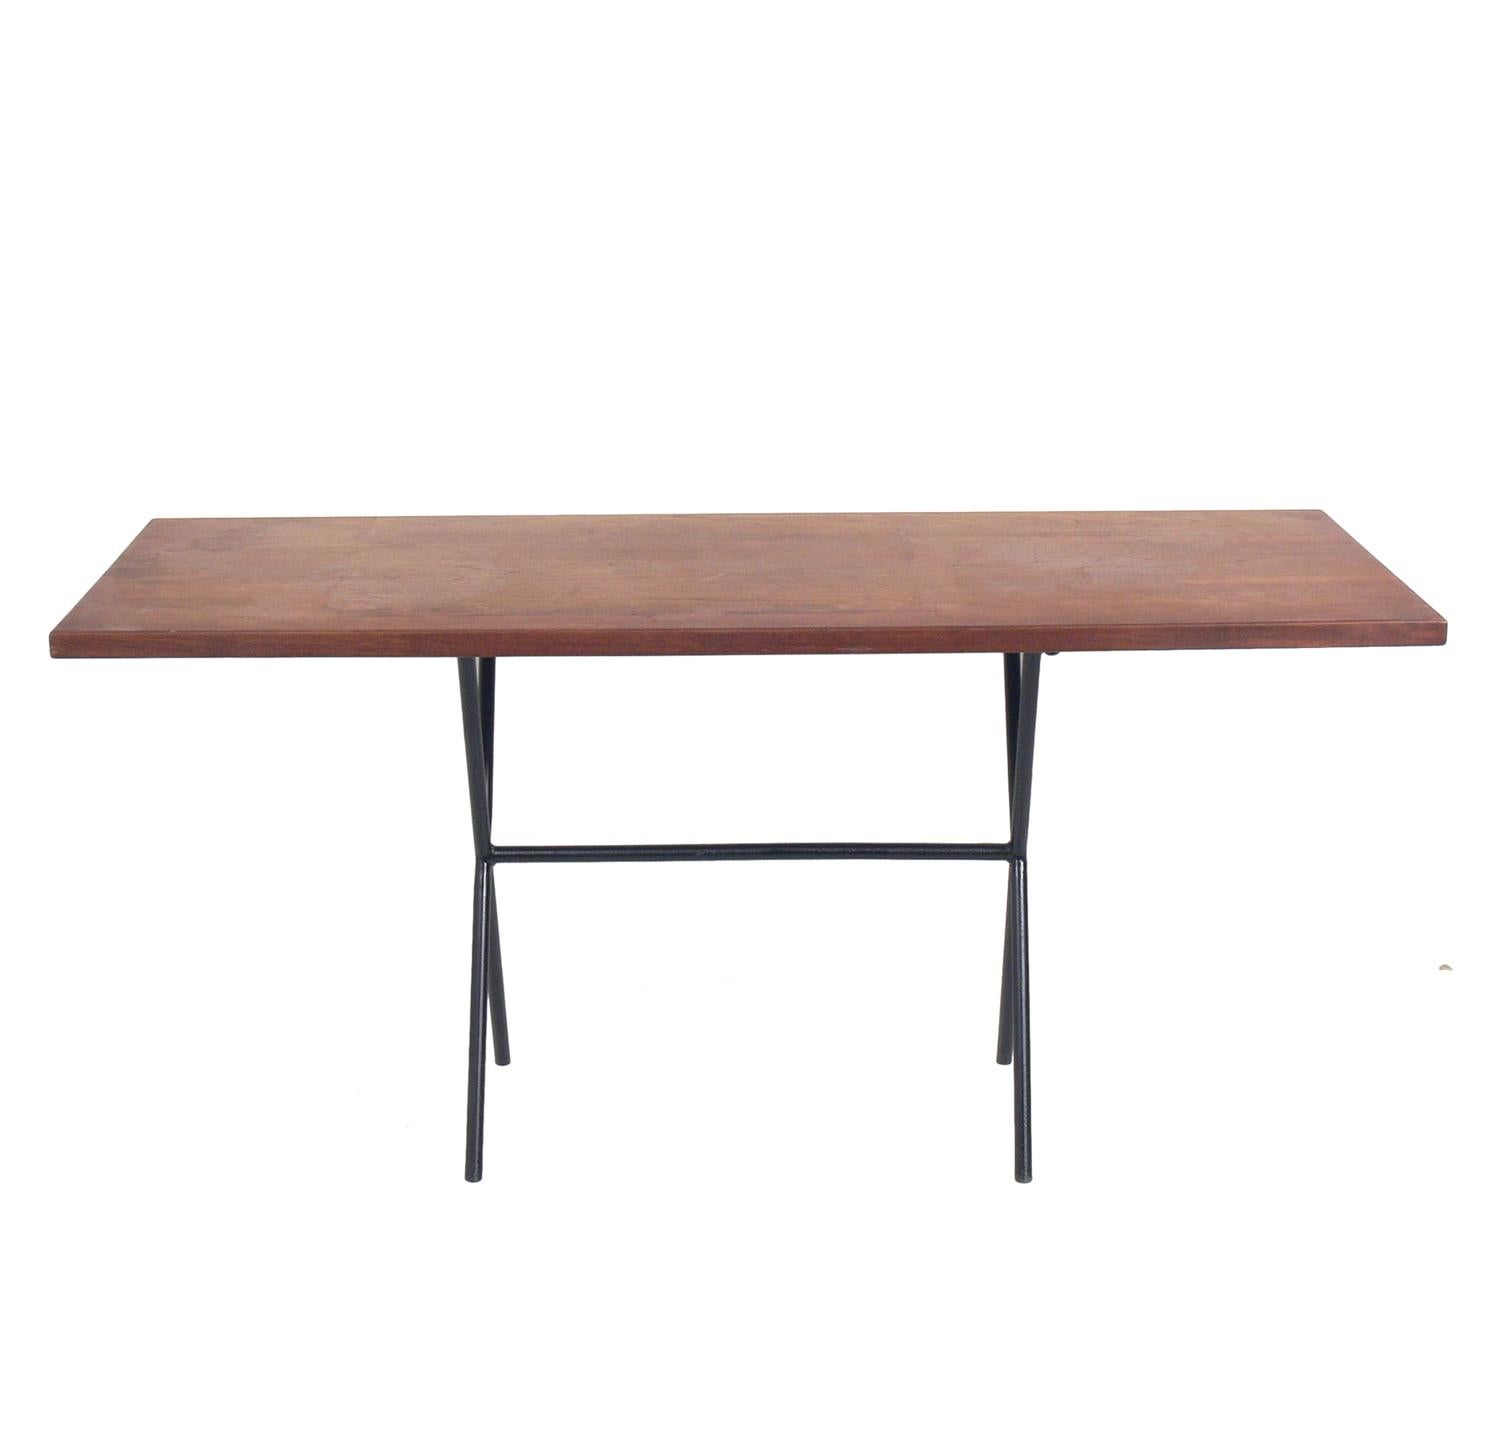 Midcentury walnut and iron X-base console table, in the manner of George Nelson, American, circa 1950s. It is a versatile size and can be used as a console or sofa table, or bar. The iron base has been repainted, and the walnut top is currently